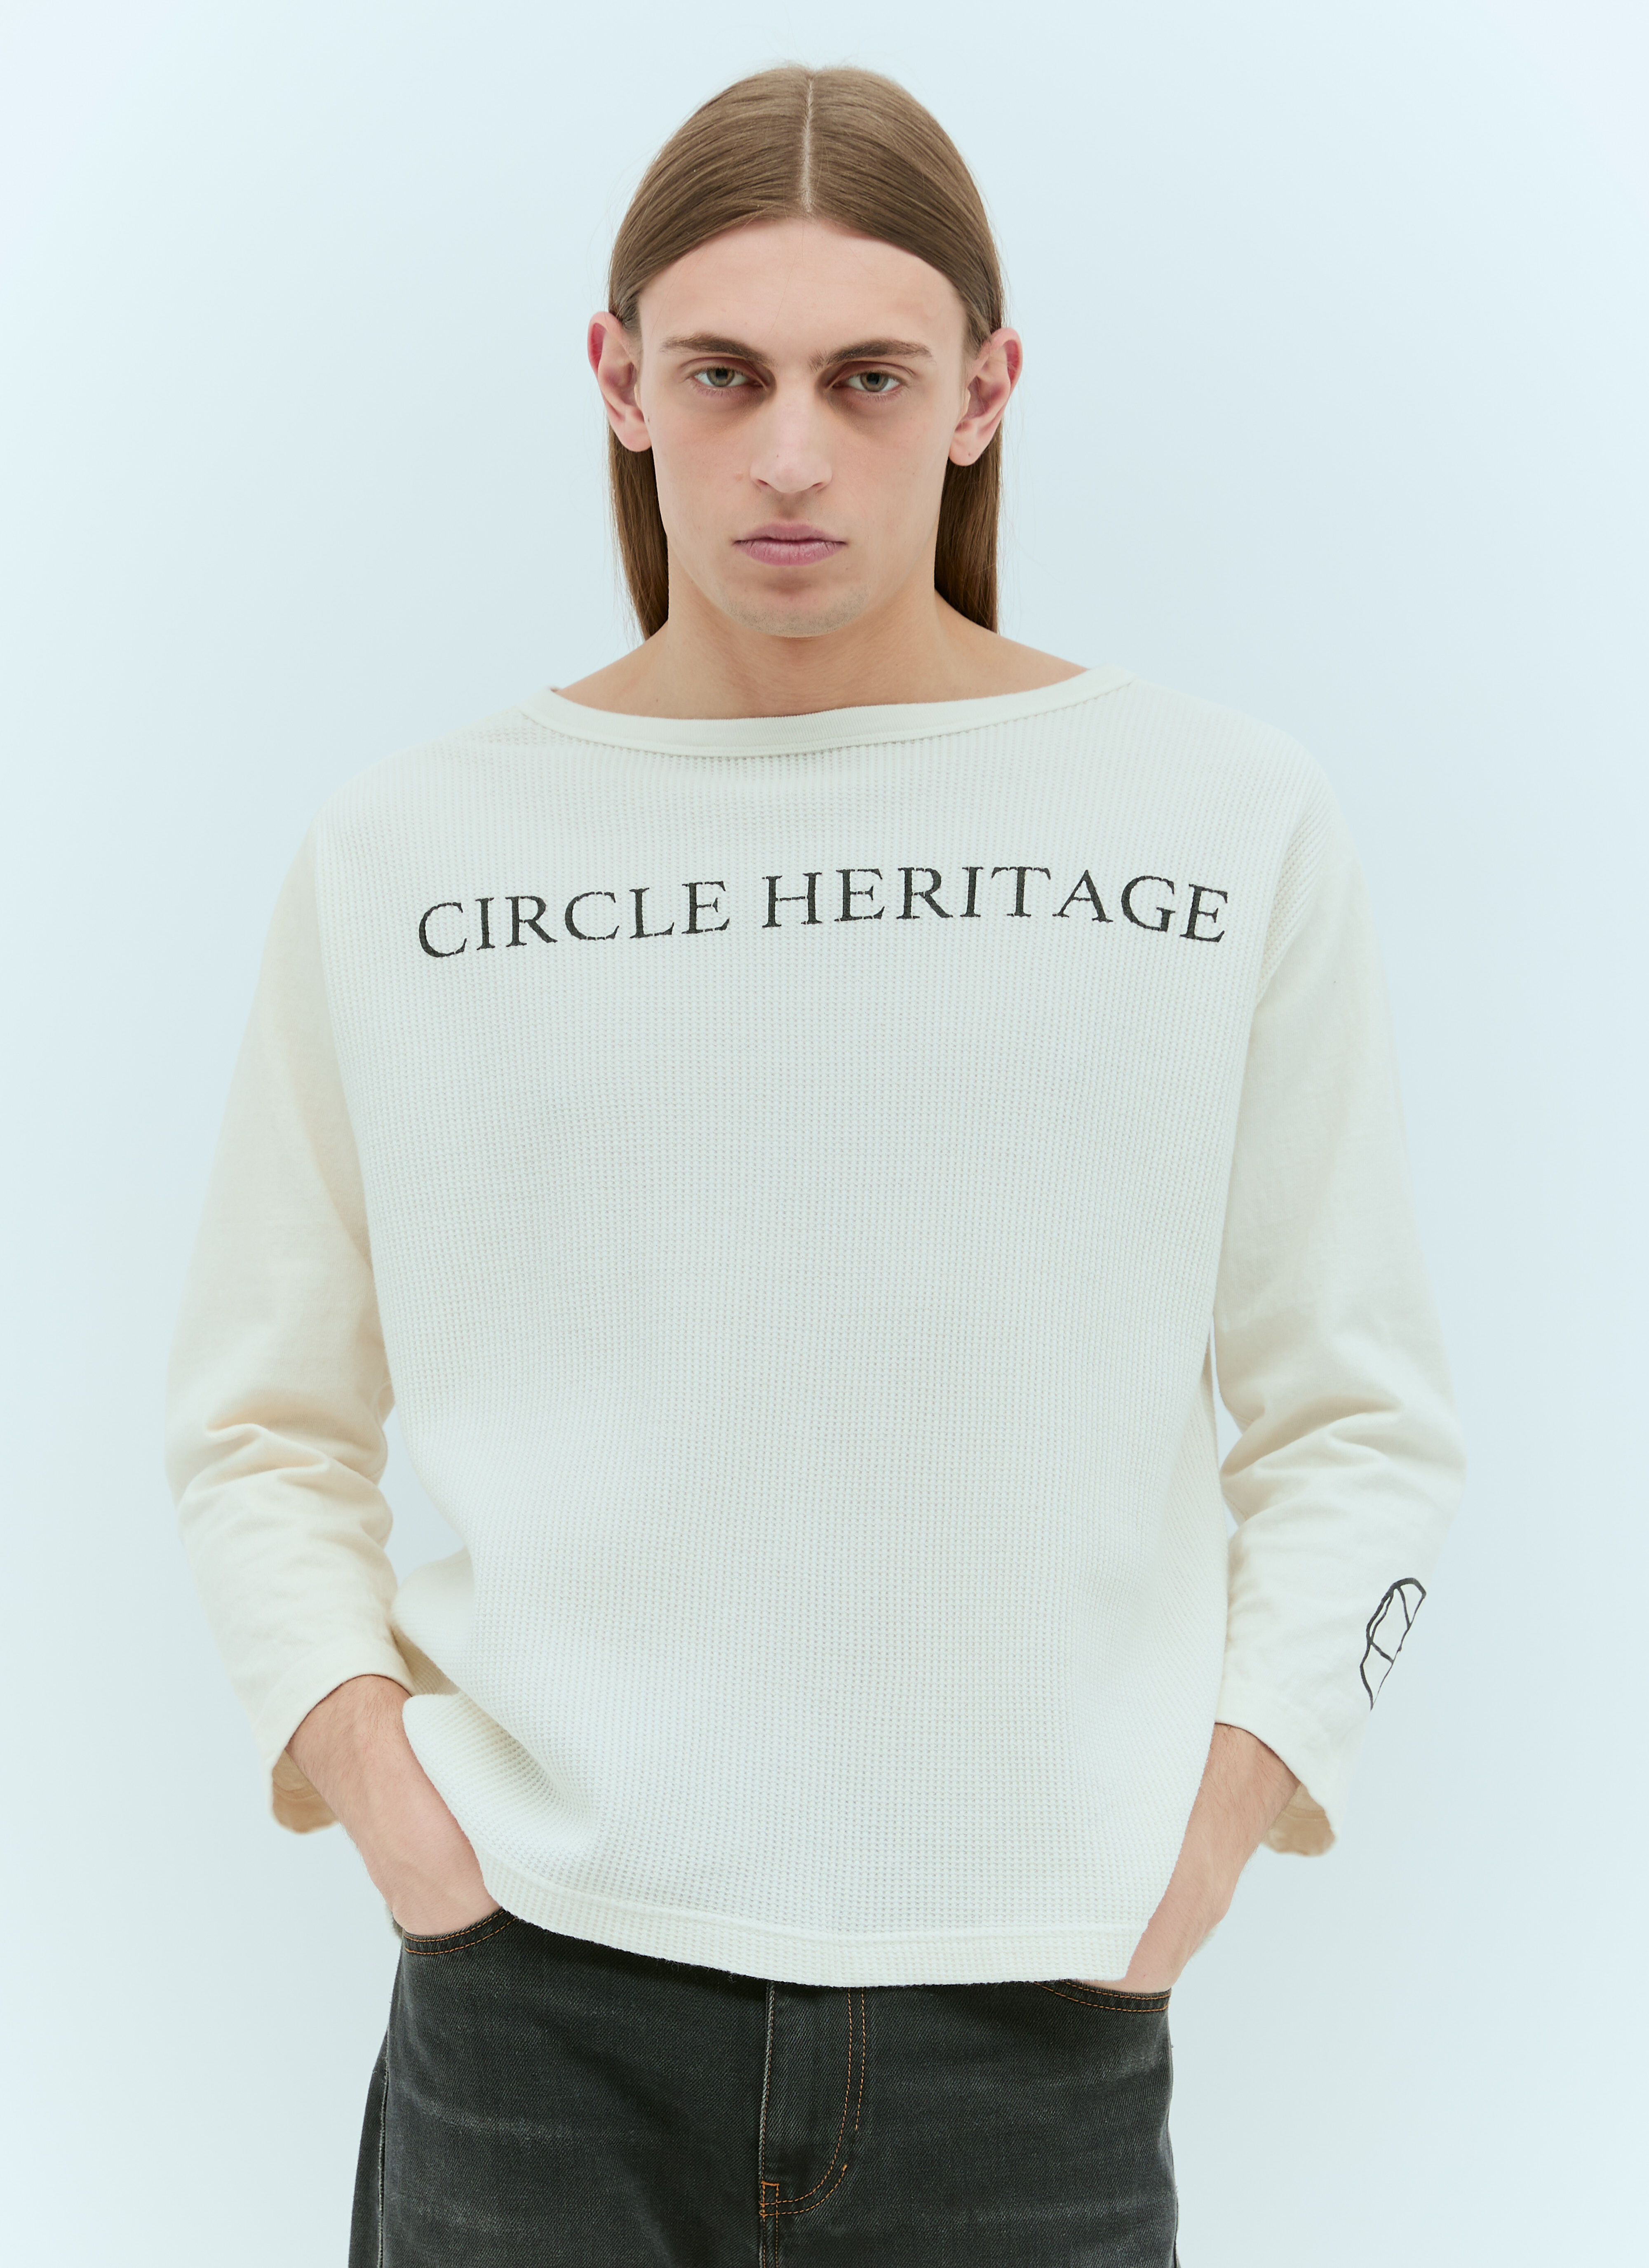 CIRCLE HERITAGE Thermal Long-Sleeve T-Shirt White che0155002